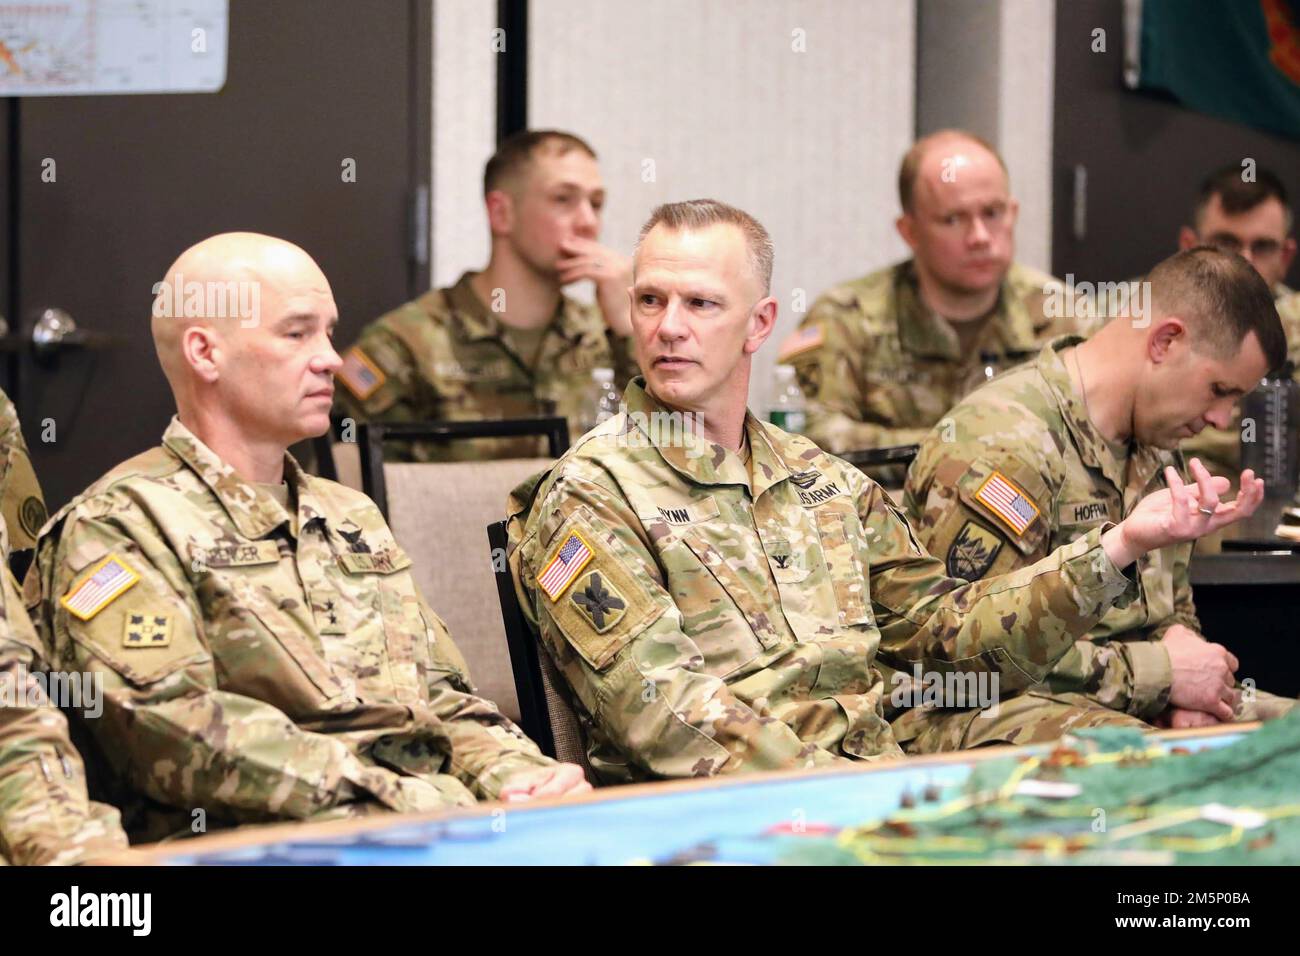 U.S. Army Maj. Gen. Thomas Spencer, commander of the 42nd Infantry Division, New York Army National Guard and Col. Sean Flynn, Commander of the 27th Infantry Brigade Combat Team, New York Army National Guard, discuss the theoretical applicaiton of multi-domain operations in a modern-day version of the Battle of Saipain in World War II during a leaders workshop in Syracuse, New York, February 26, 2022. The workshop served to prepare the 27th IBCT's senior leaders for upcoming deployments and development of their future forces. Stock Photo